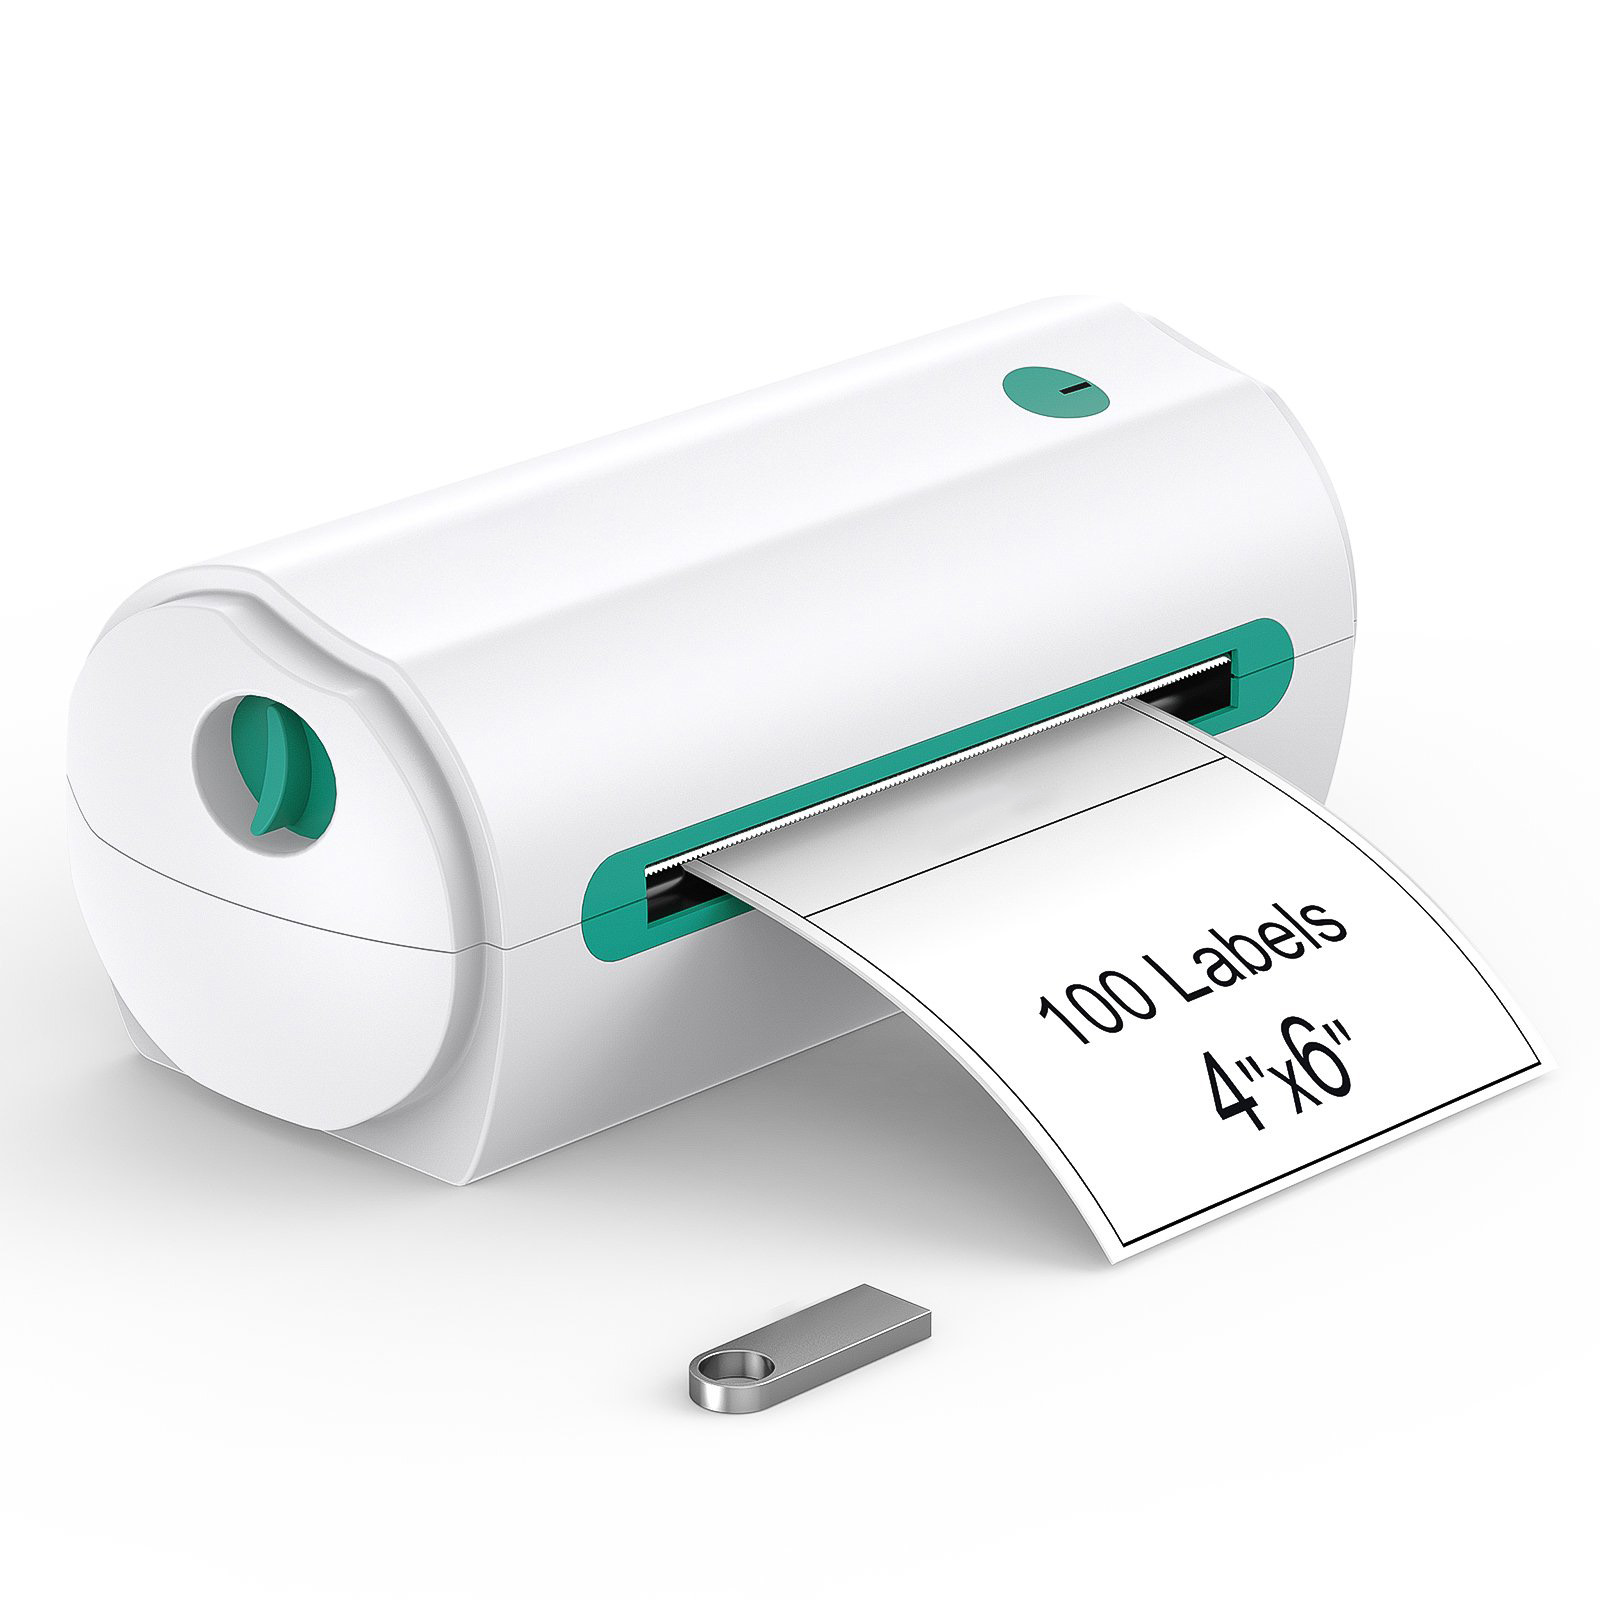 USB Thermal Shipping Label Printer for 4 x 6, Thermal Printer for Shipping Packages, Compatible with Etsy, Shopify, USPS, ShipStation